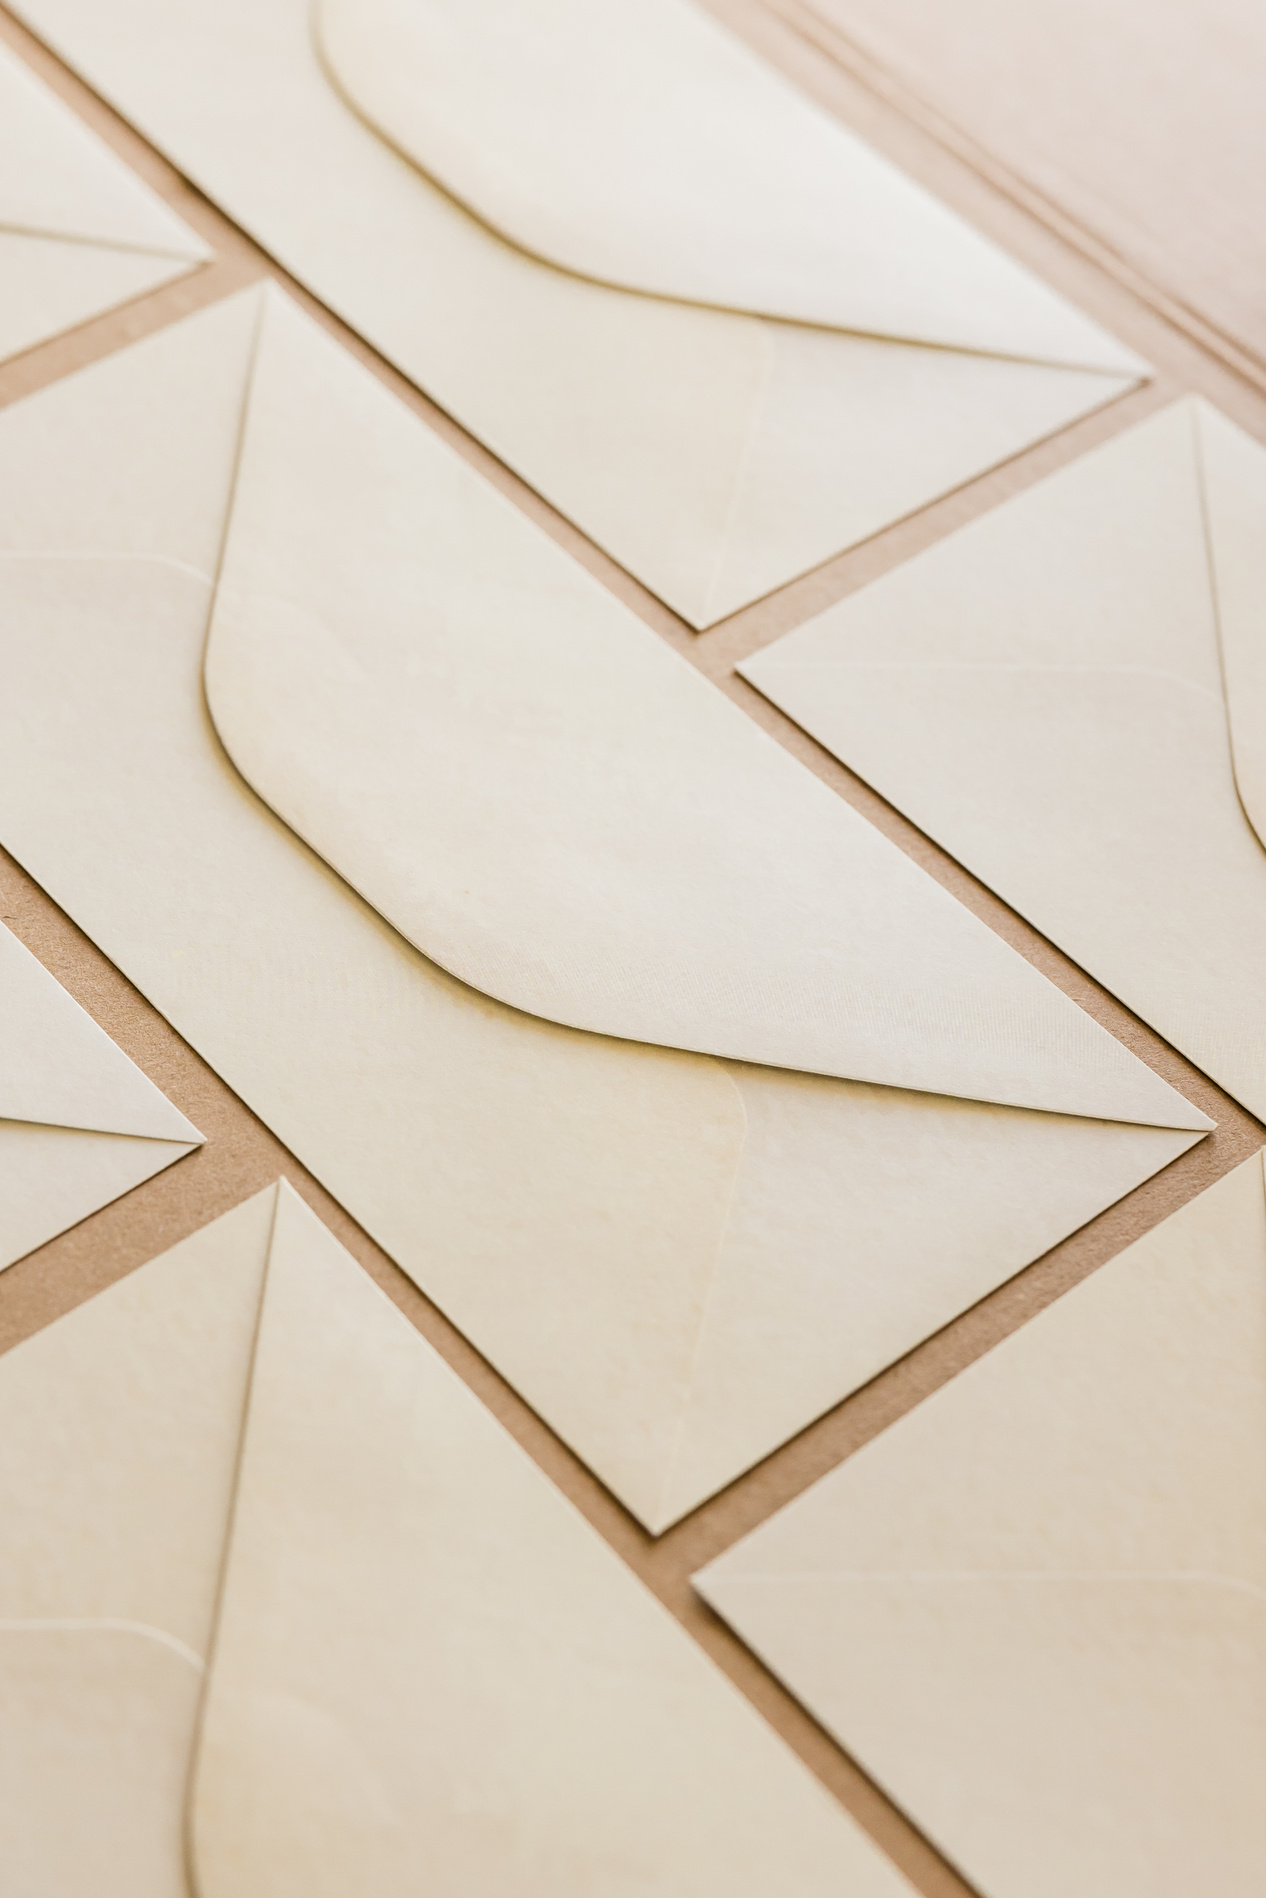 Envelopes Laid Out on Brown Background